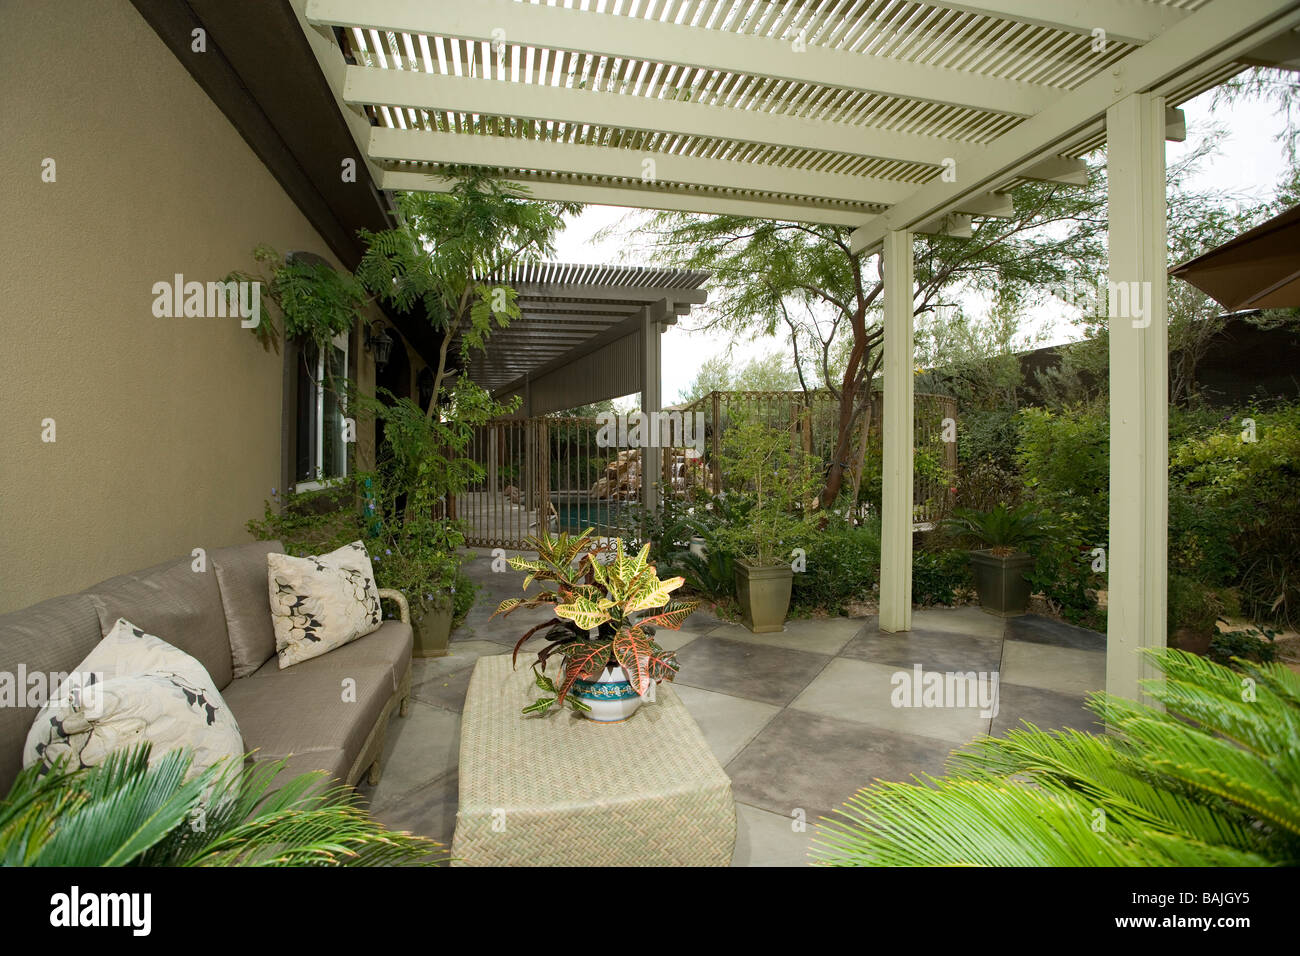 Patio of a modern residence Stock Photo